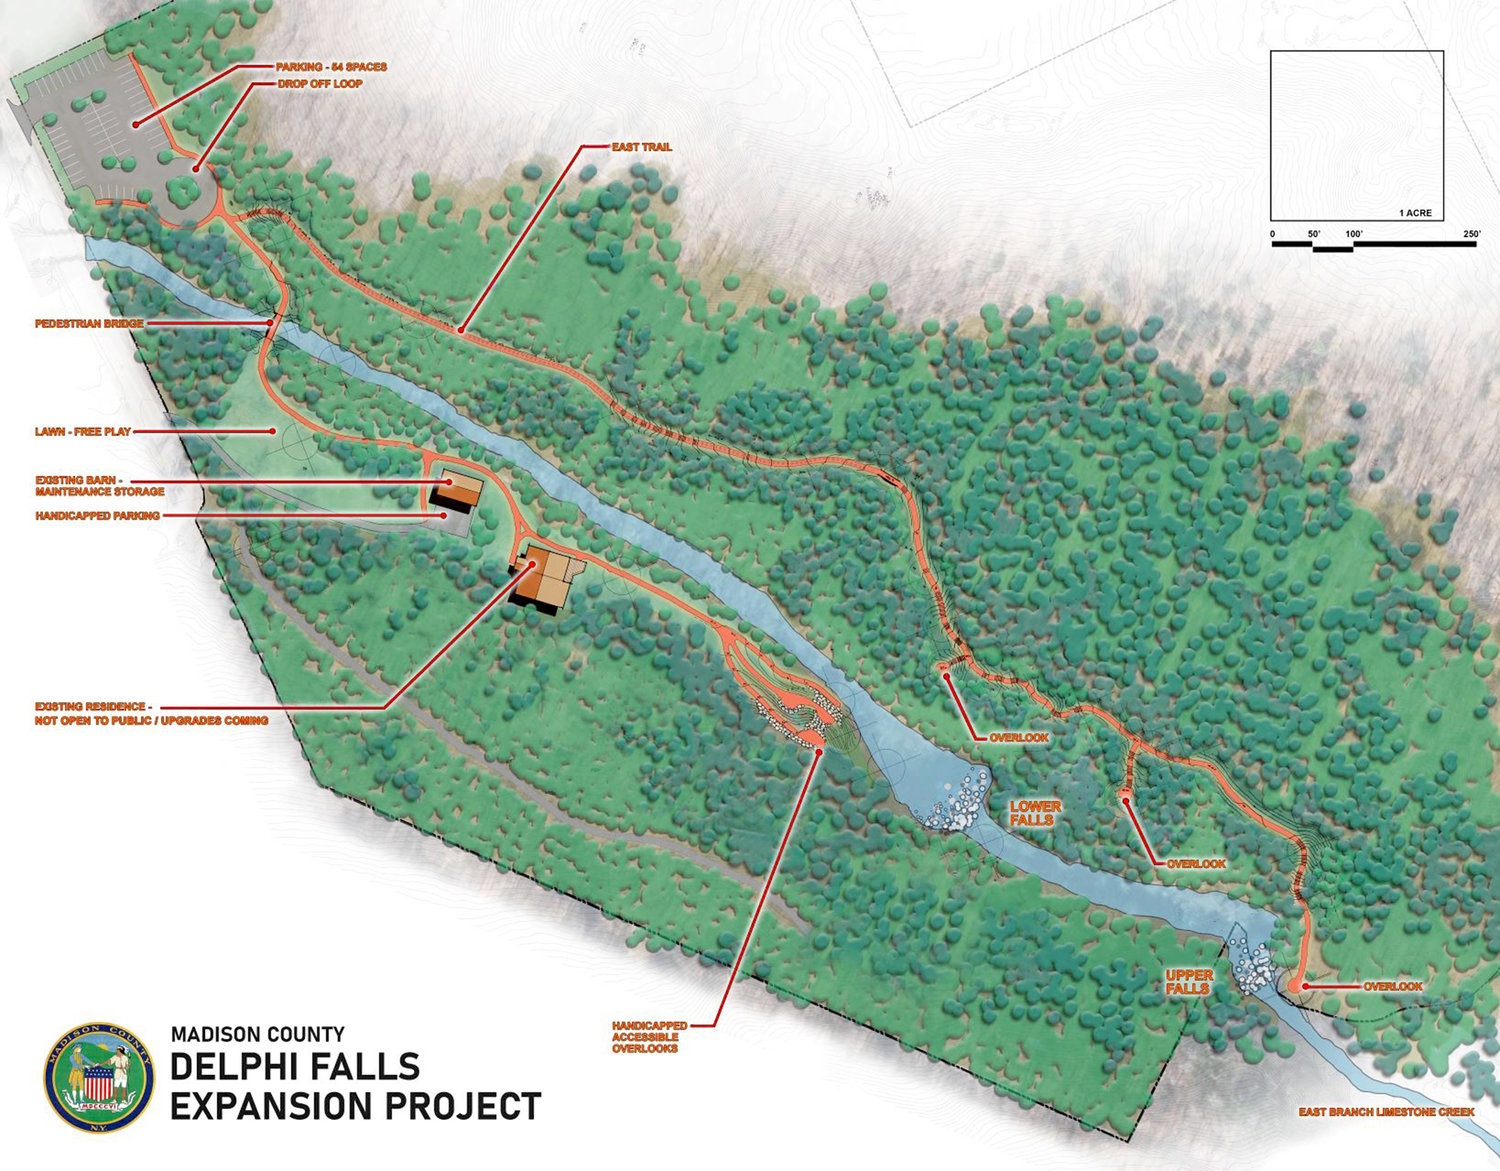 This summer, the 66-acre Delphi Falls County Park property – with only a fraction of its acreage currently accessible to the public – will be entering into phase one of planned improvements and expansion.